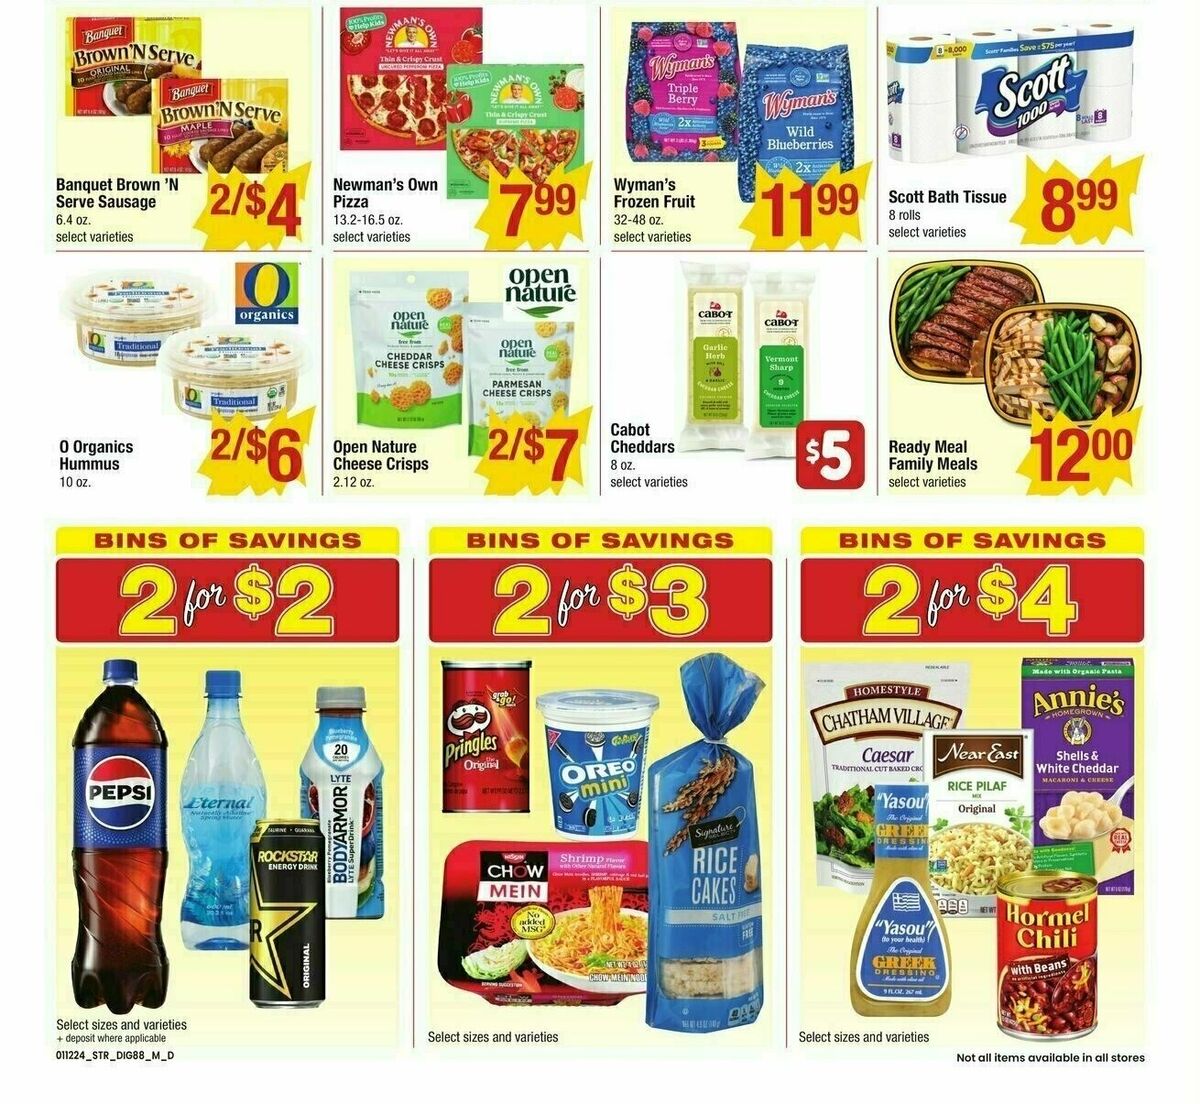 Star Market Additional Savings Weekly Ad from January 12